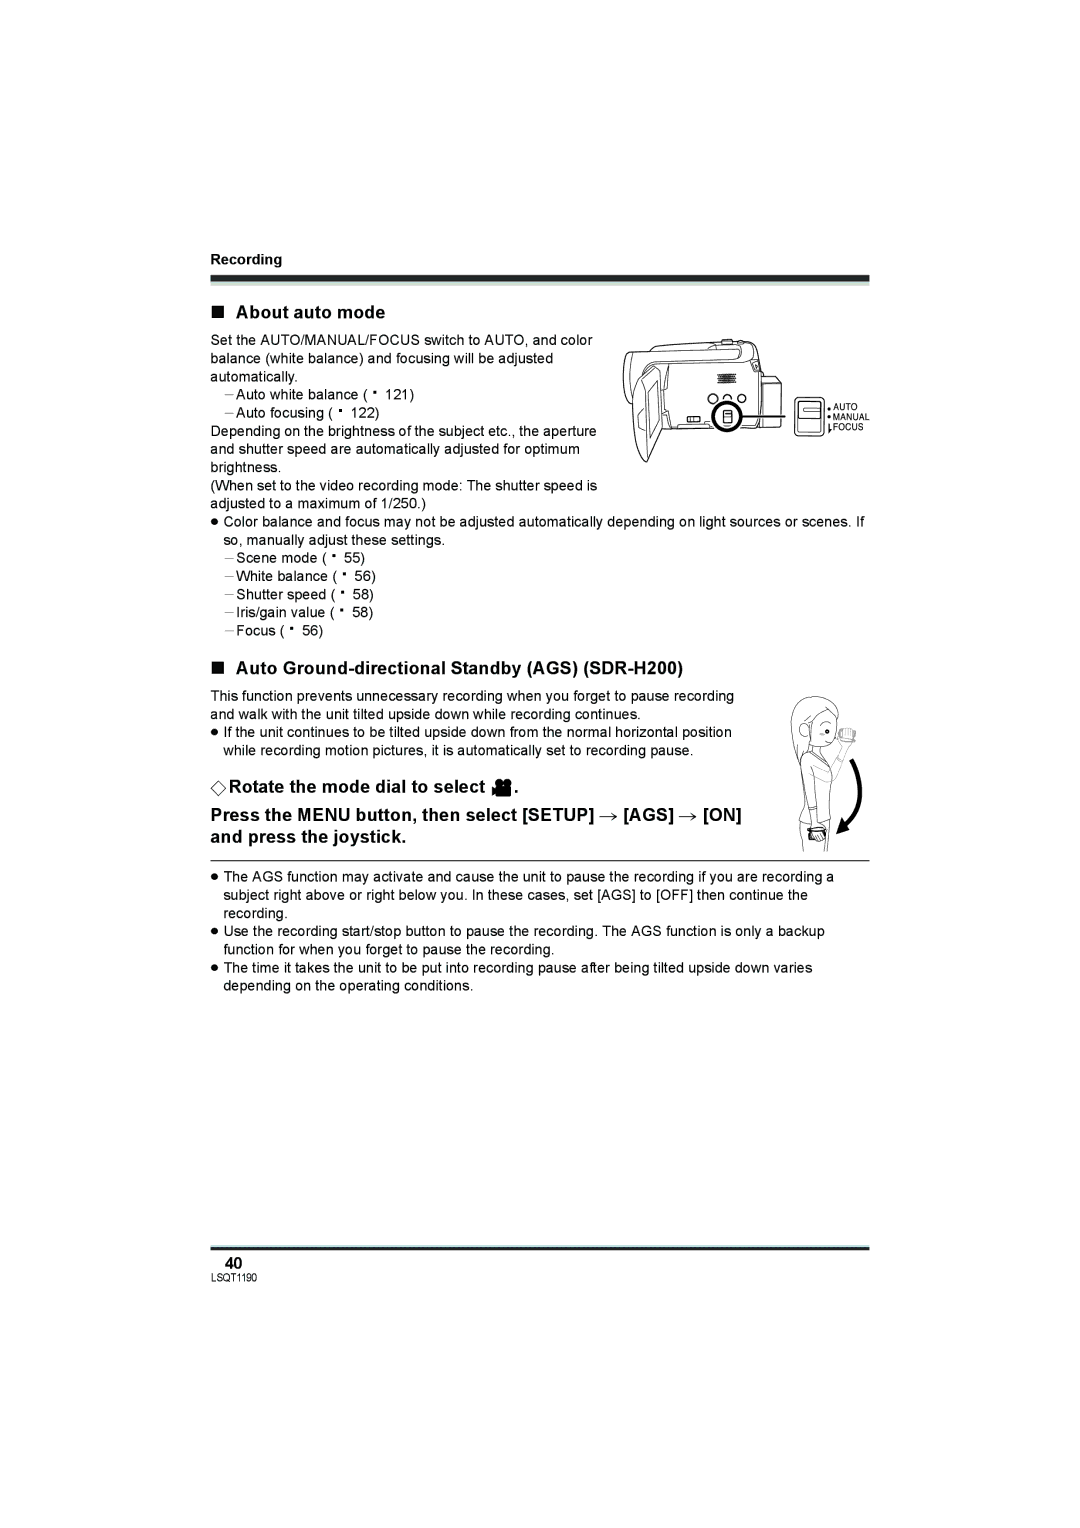 Panasonic SDR-H18 operating instructions About auto mode, Auto Ground-directional Standby AGS SDR-H200 